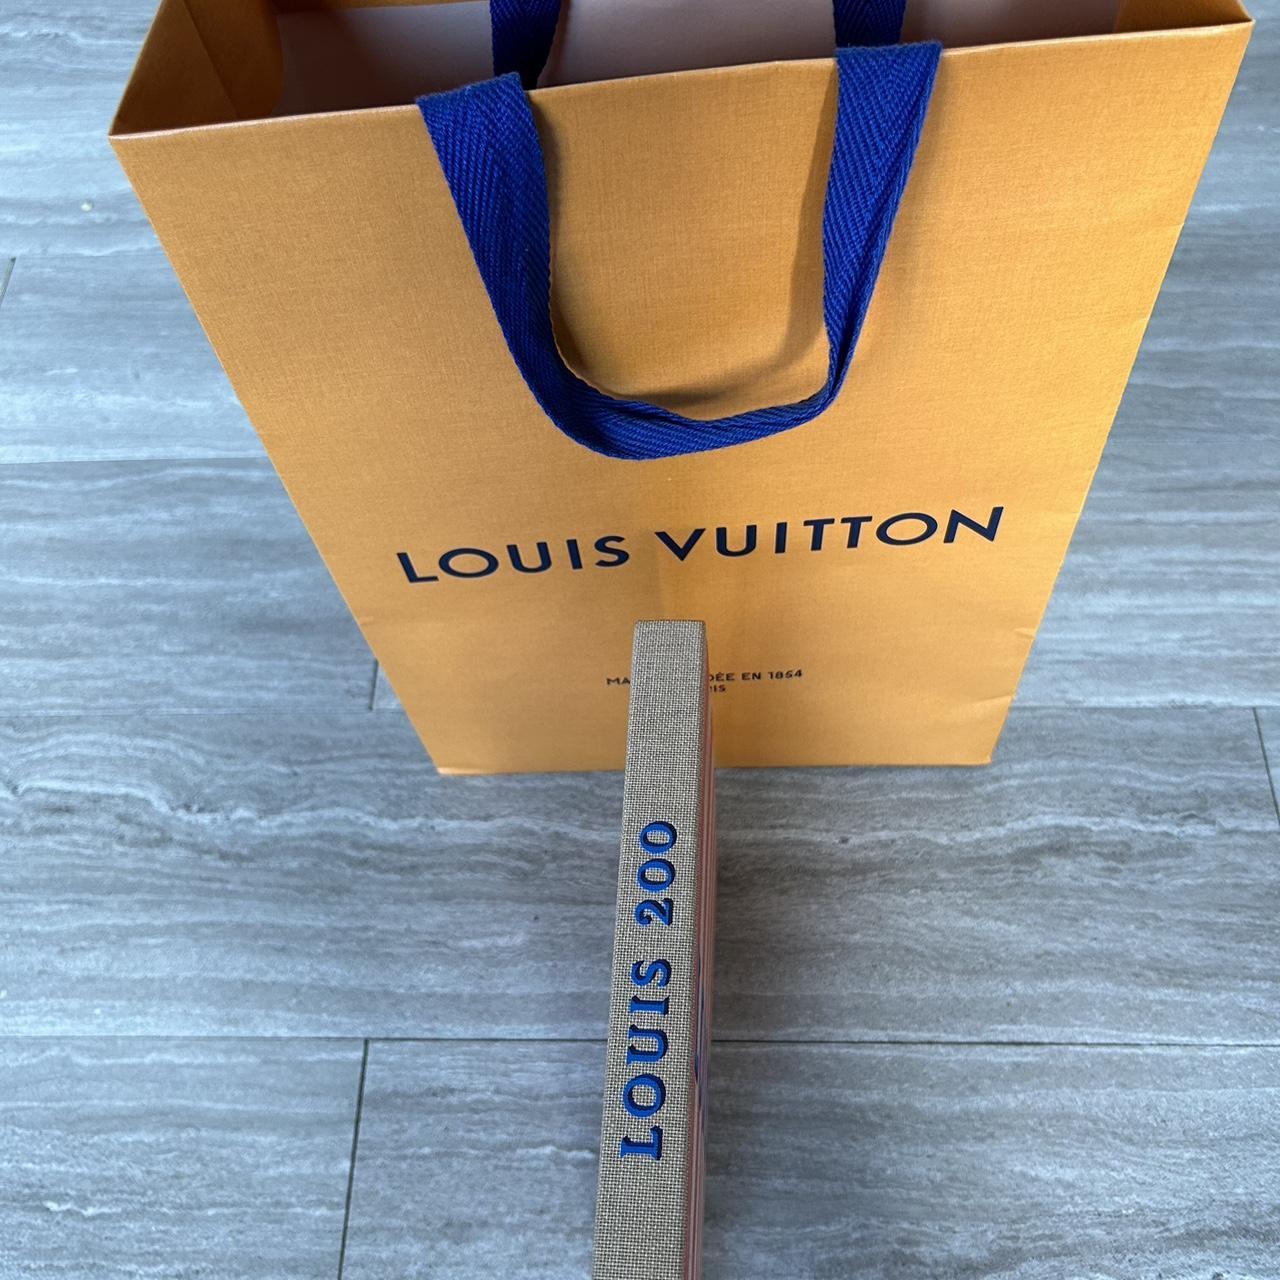 Louis Vuitton 200 Years Hardcover Book for Sale in New York, NY